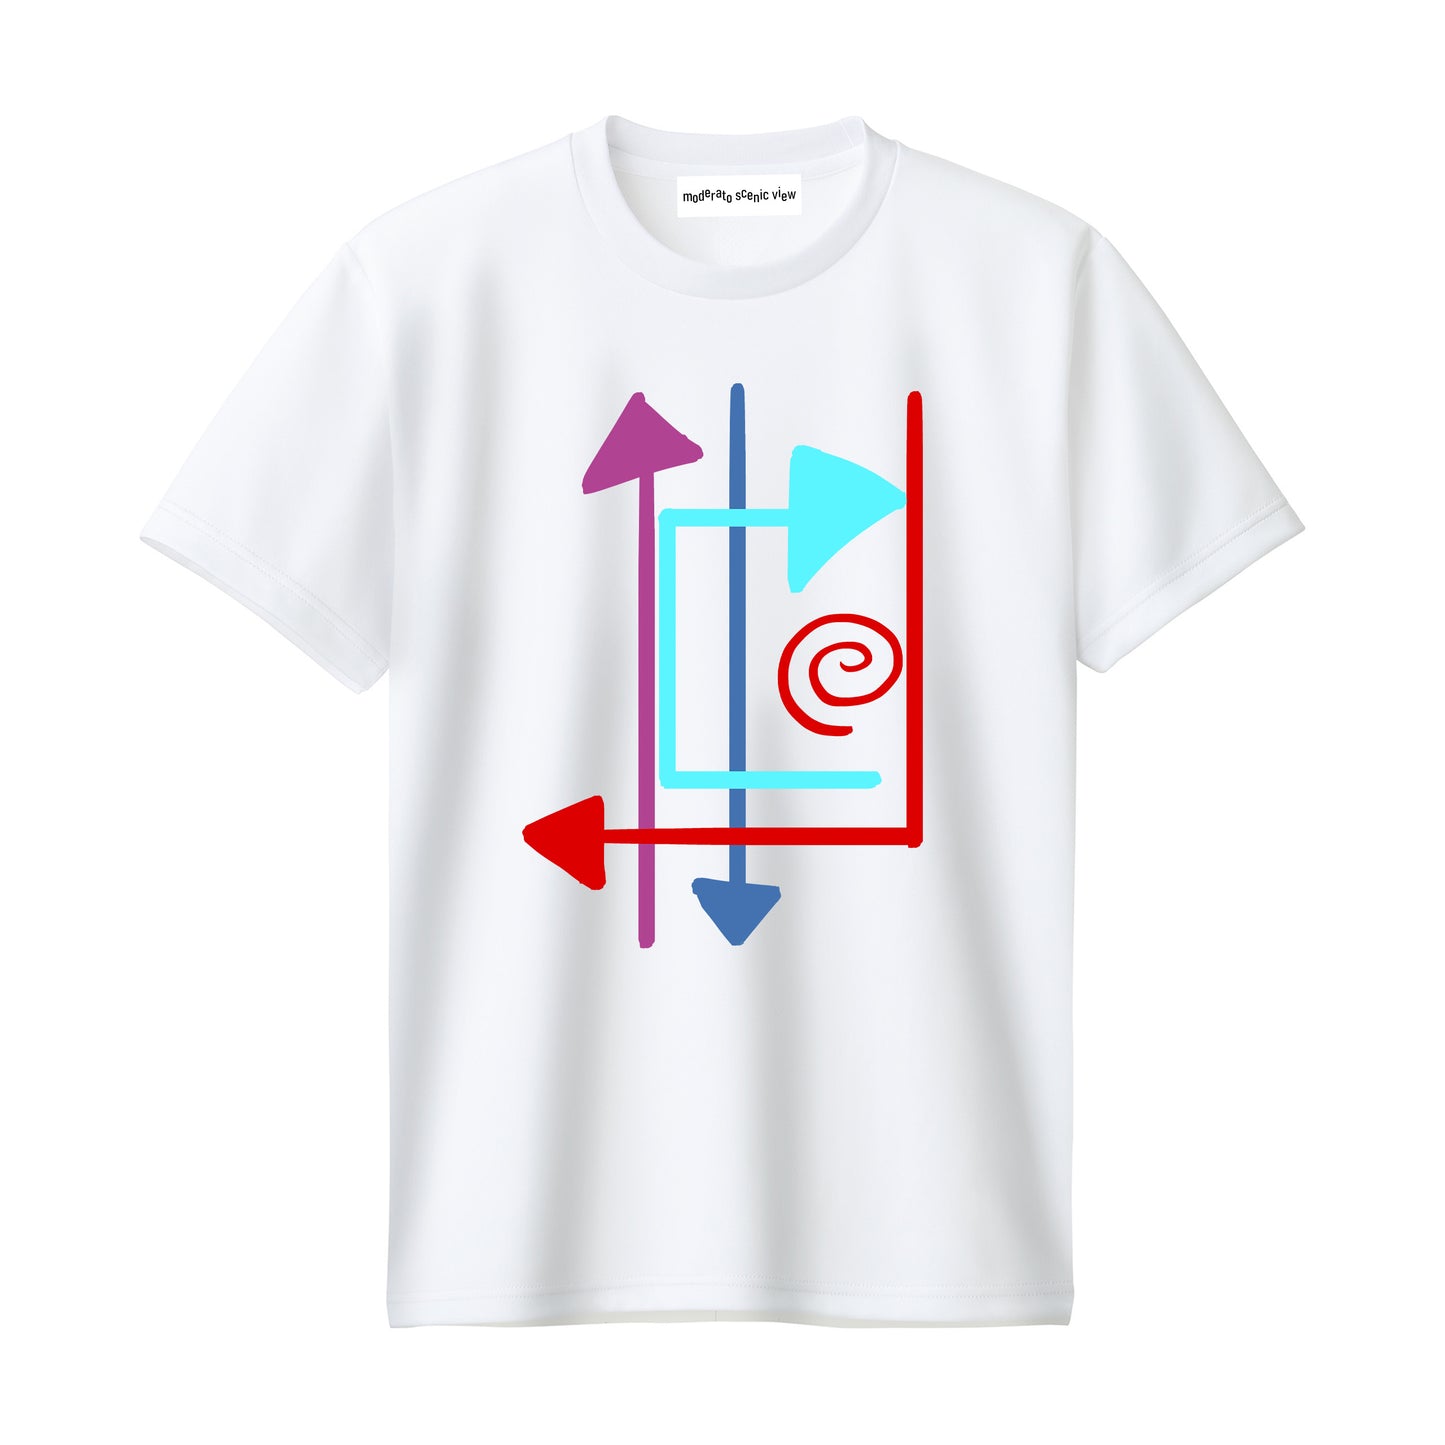 [moderato scenic view] T-shirts [arrowed]